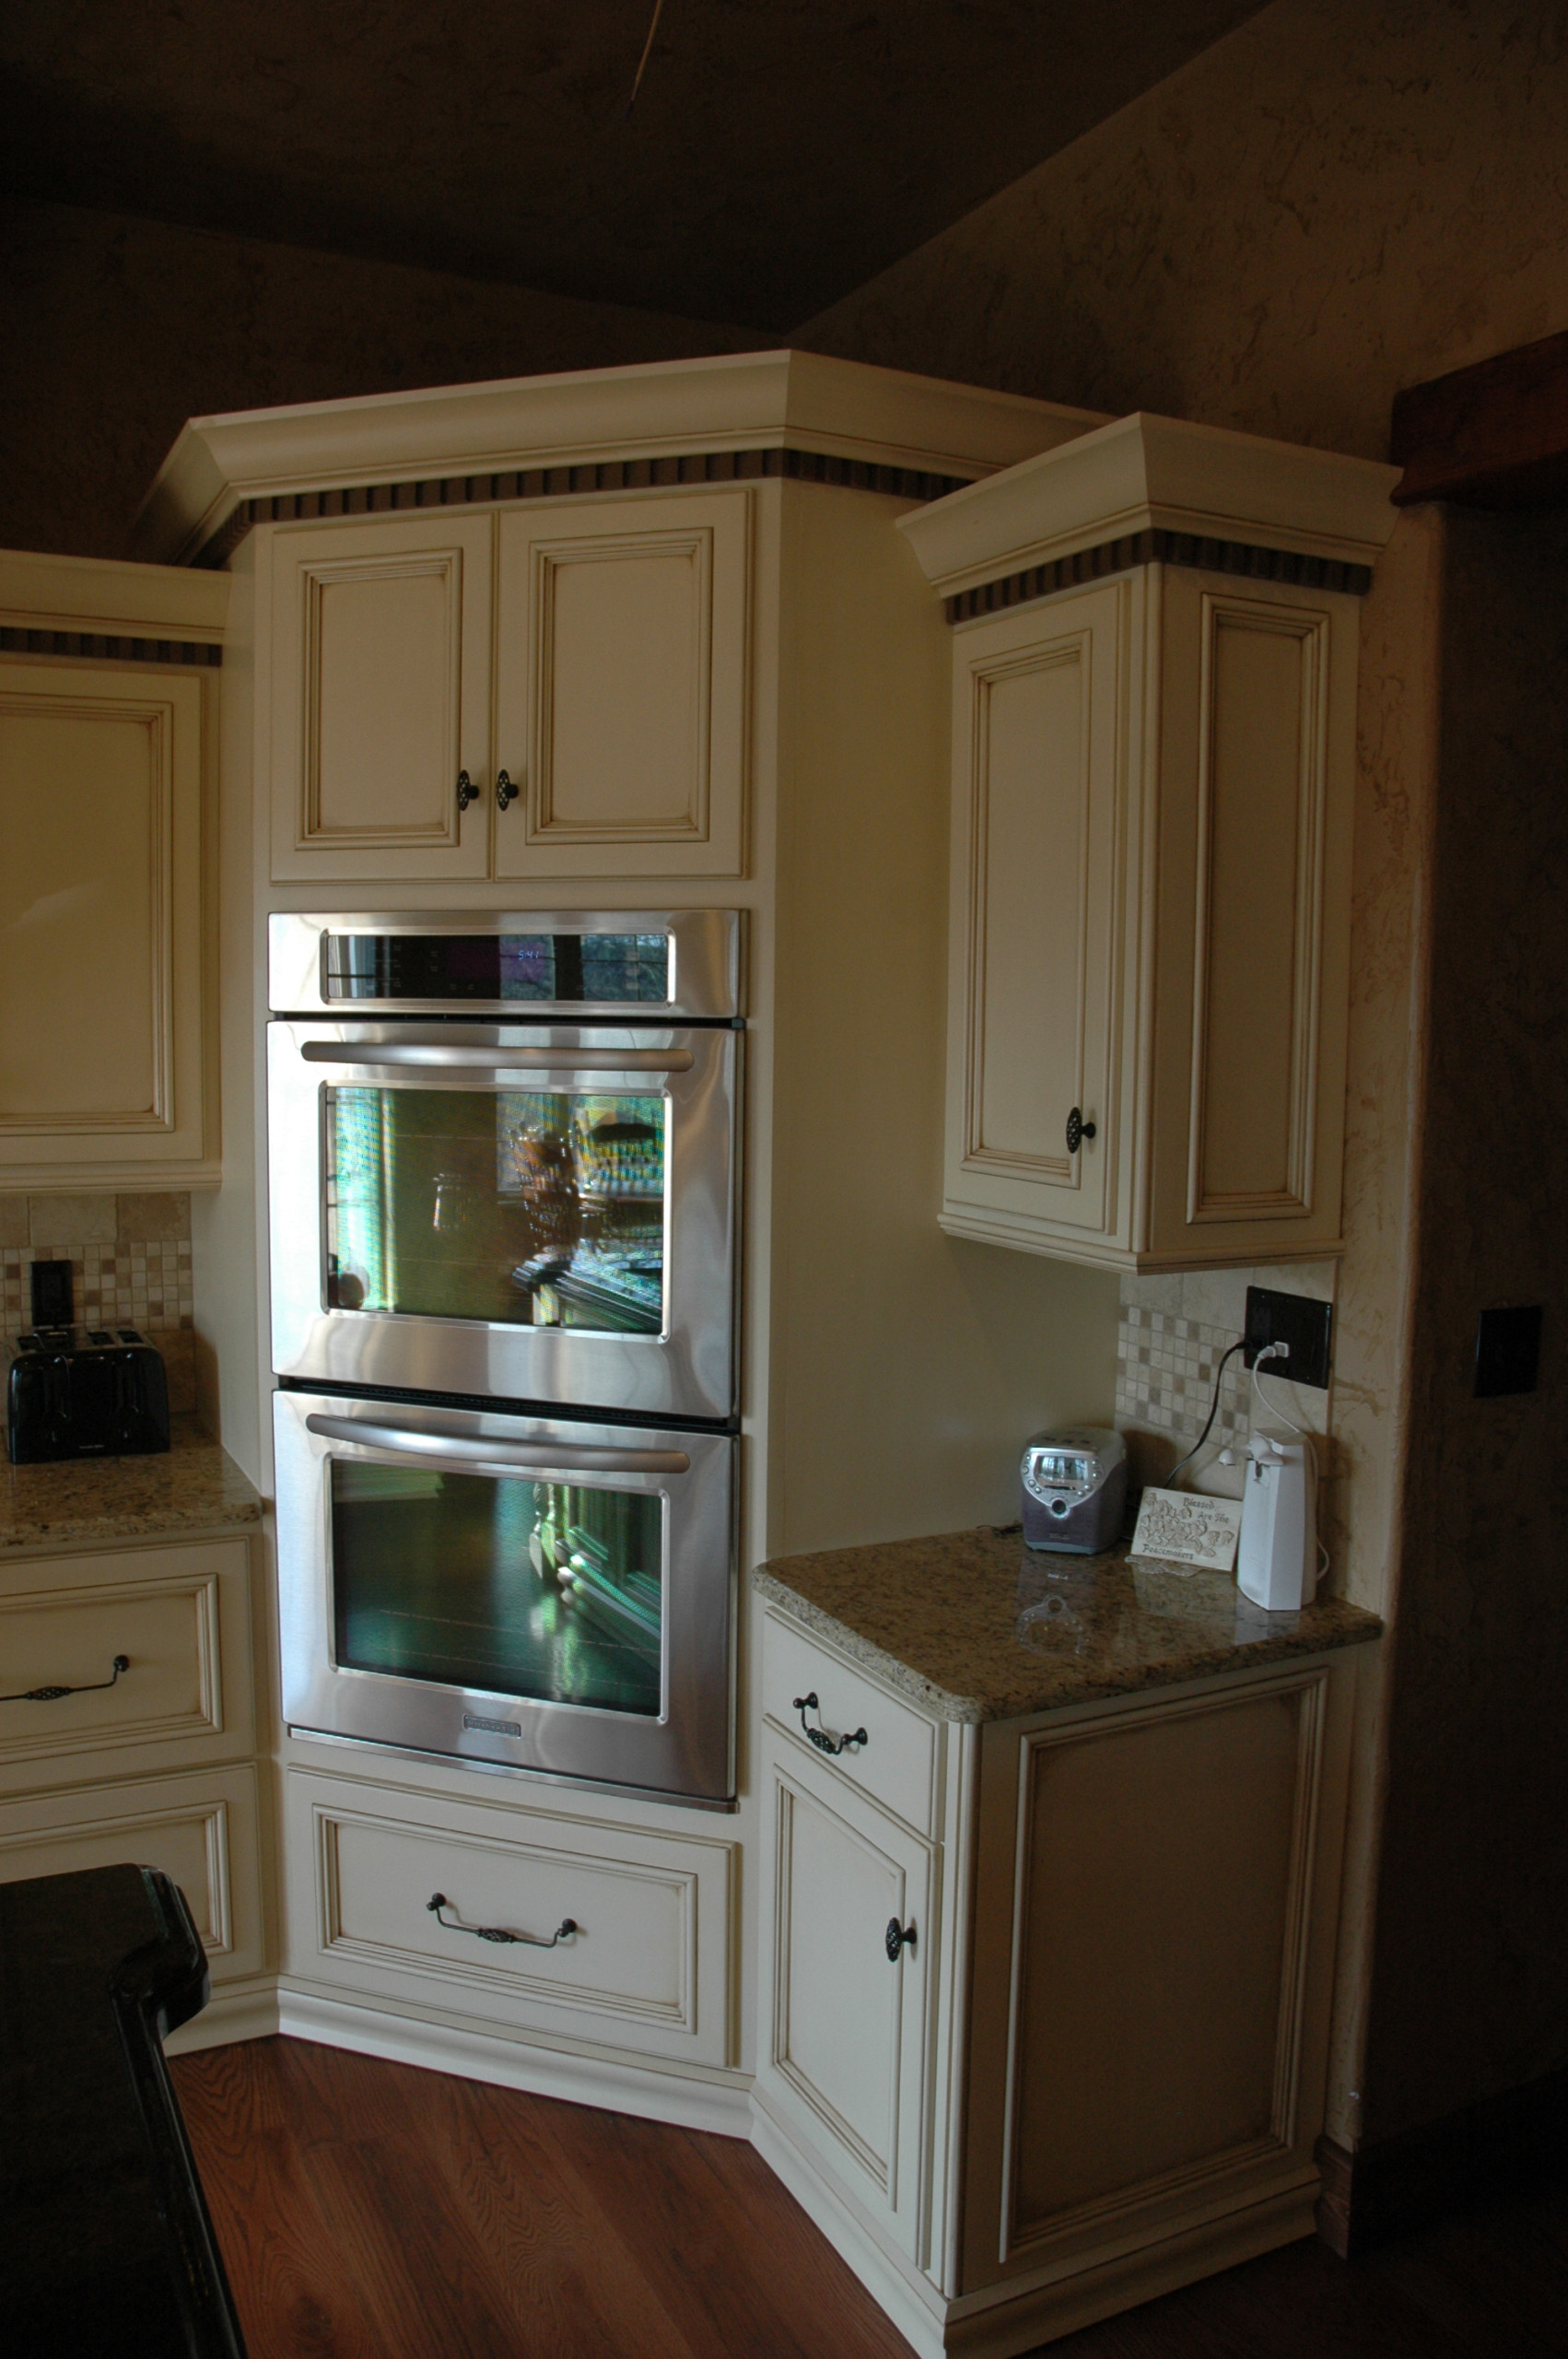 Wall Oven In Corner Cabinet Ideas los angeles 2021